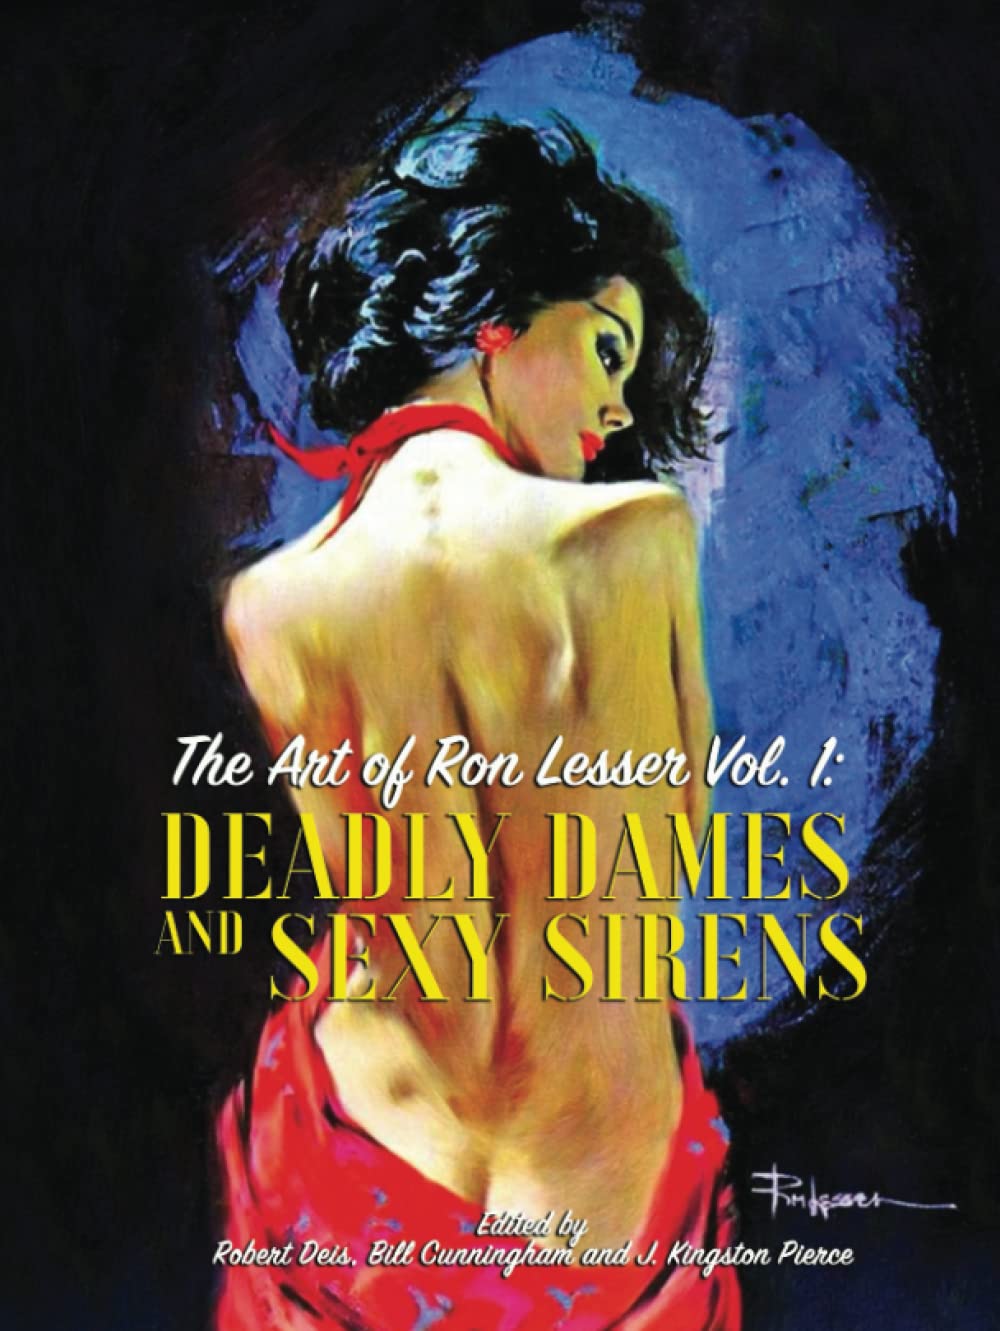 The Art of Ron Lesser Vol. 1: Deadly Dames and Sexy Sirens - Softcover